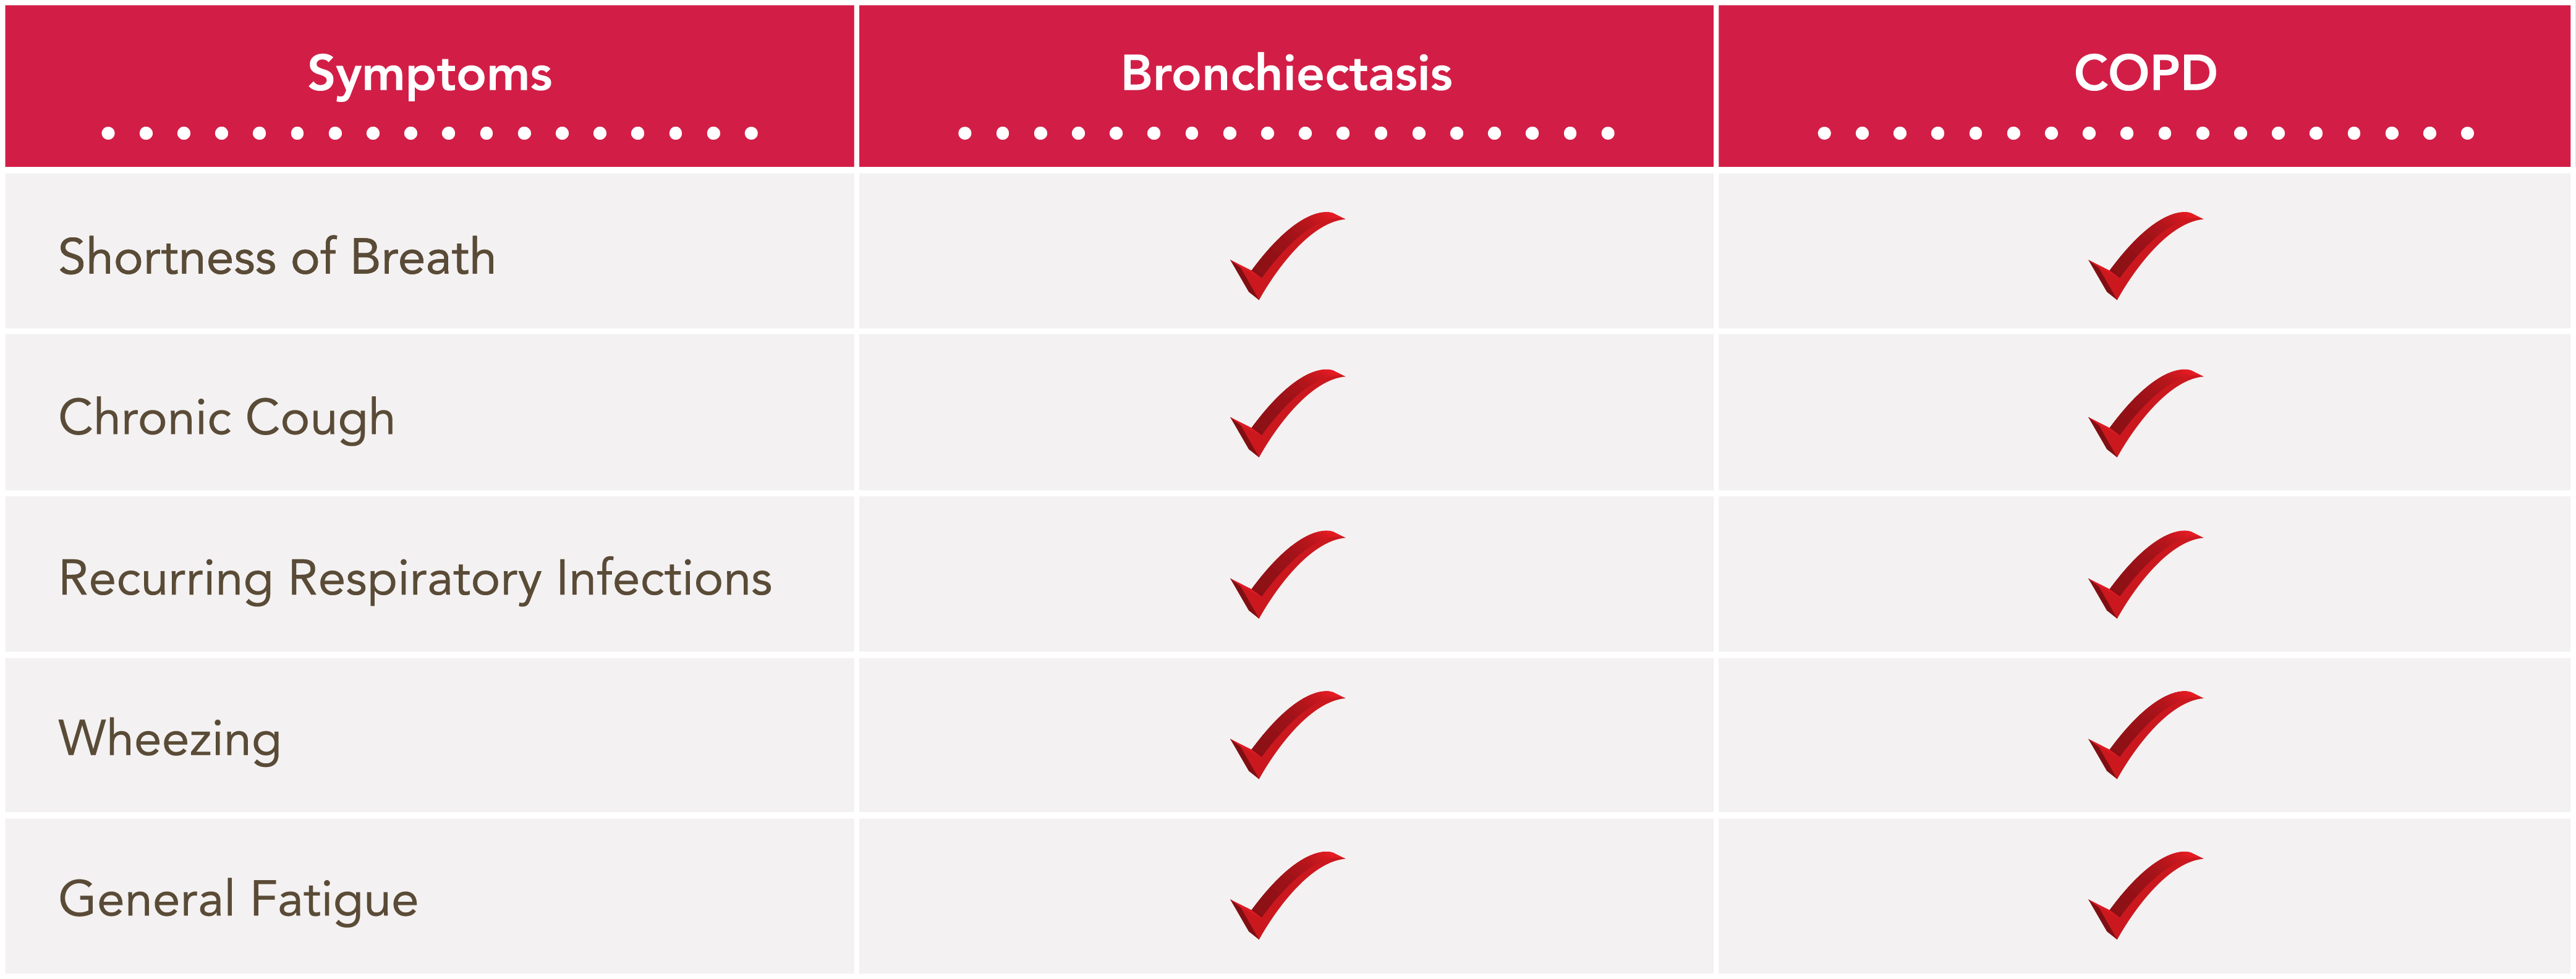 Similarities Between COPD and Bronchiectasis Chart